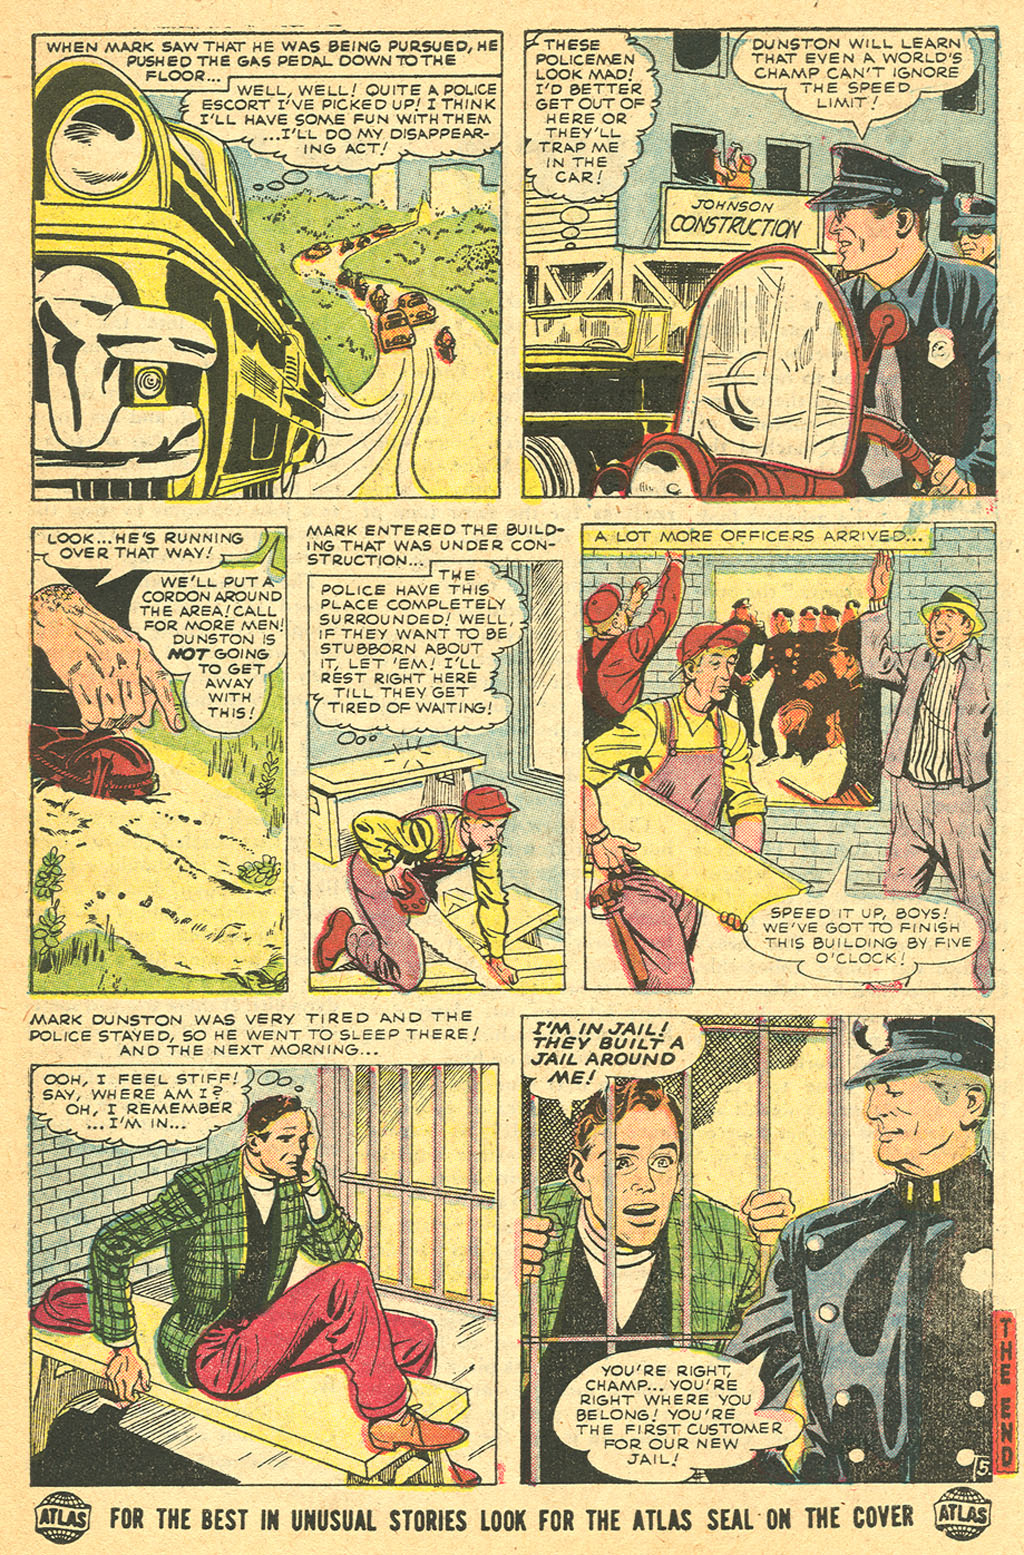 Marvel Tales (1949) 139 Page 6